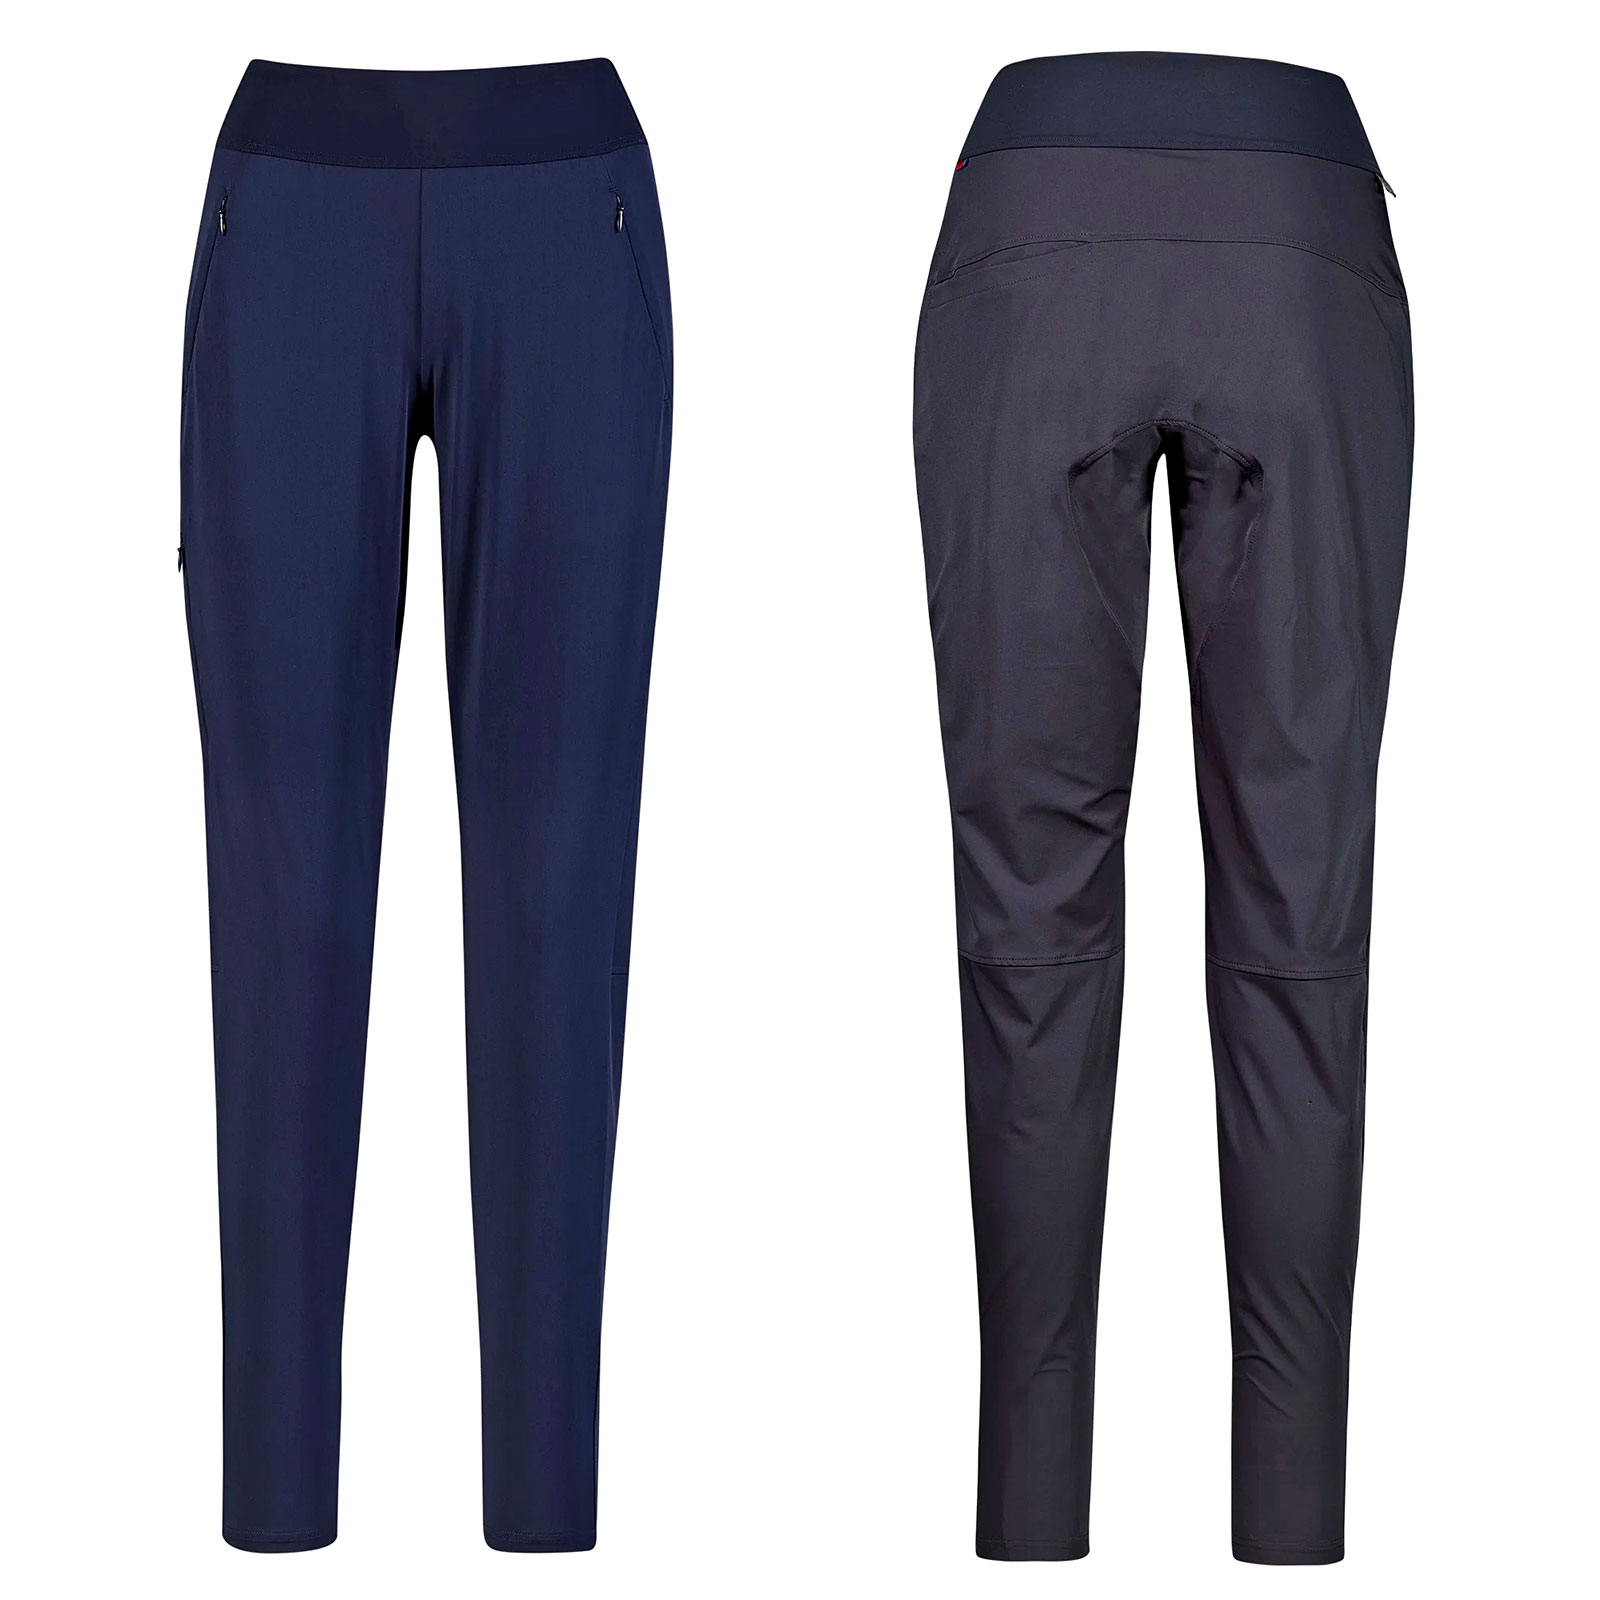 Velocio Recon casual lifestyle gear for cyclists, Women's Recon Stealth Pants